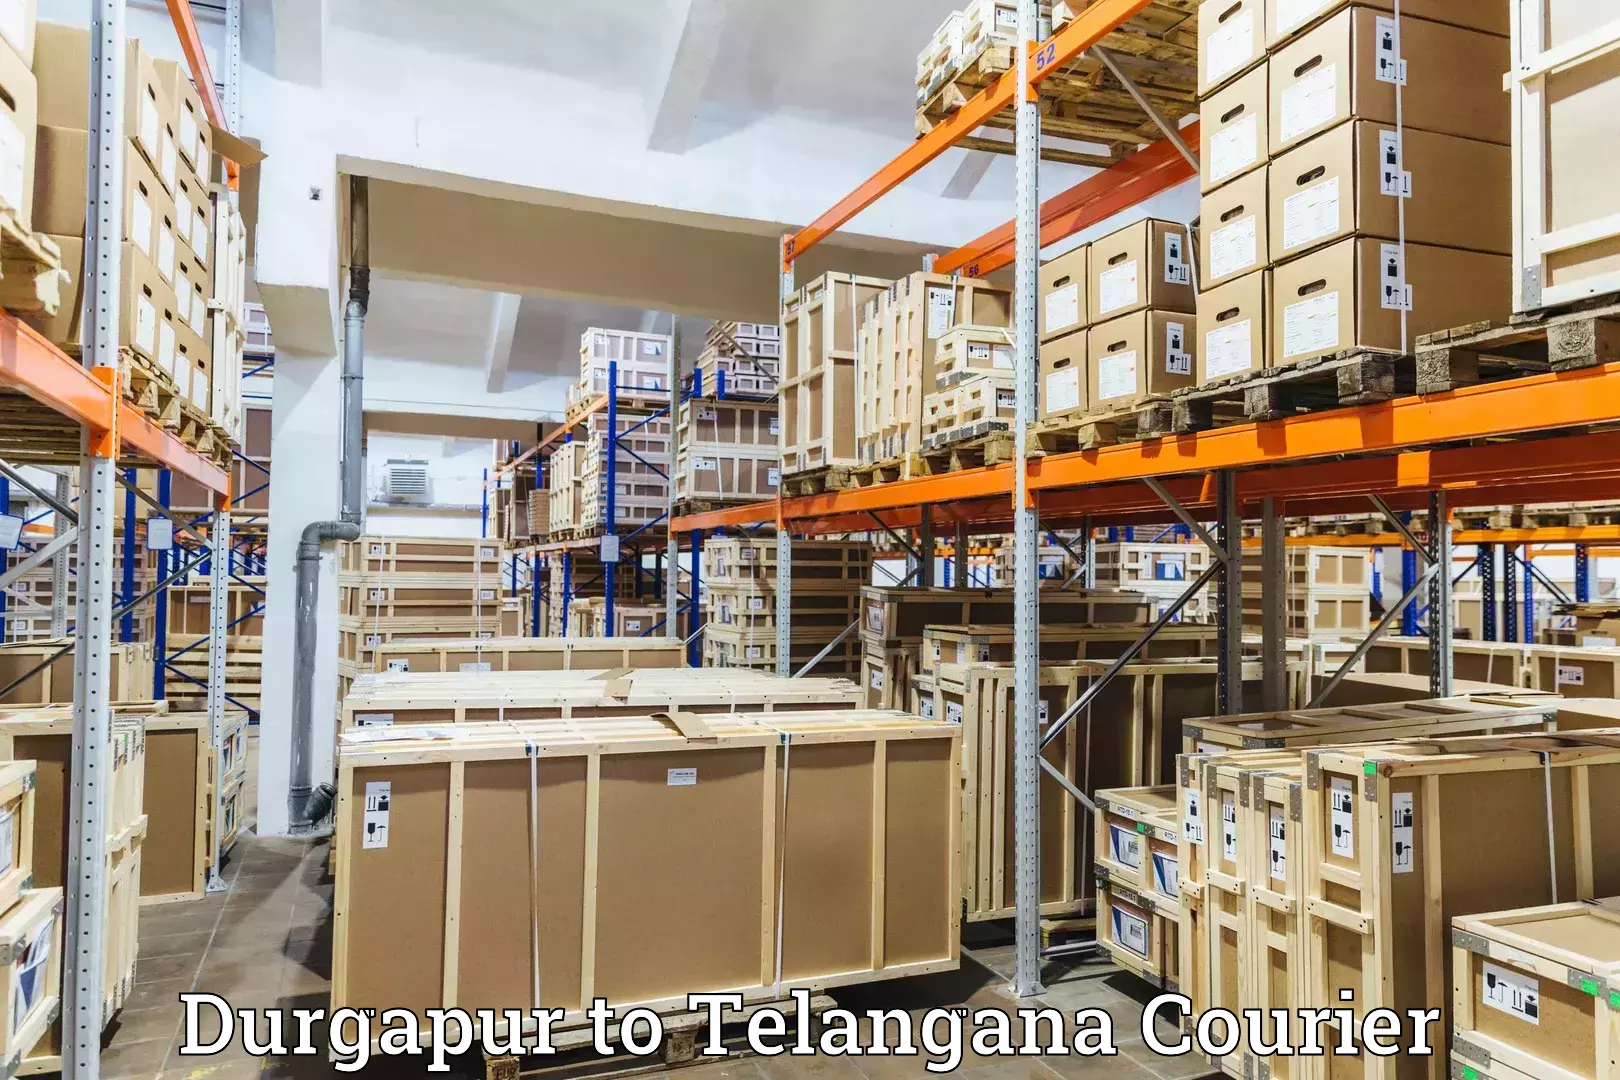 Secure shipping methods Durgapur to Allapalli